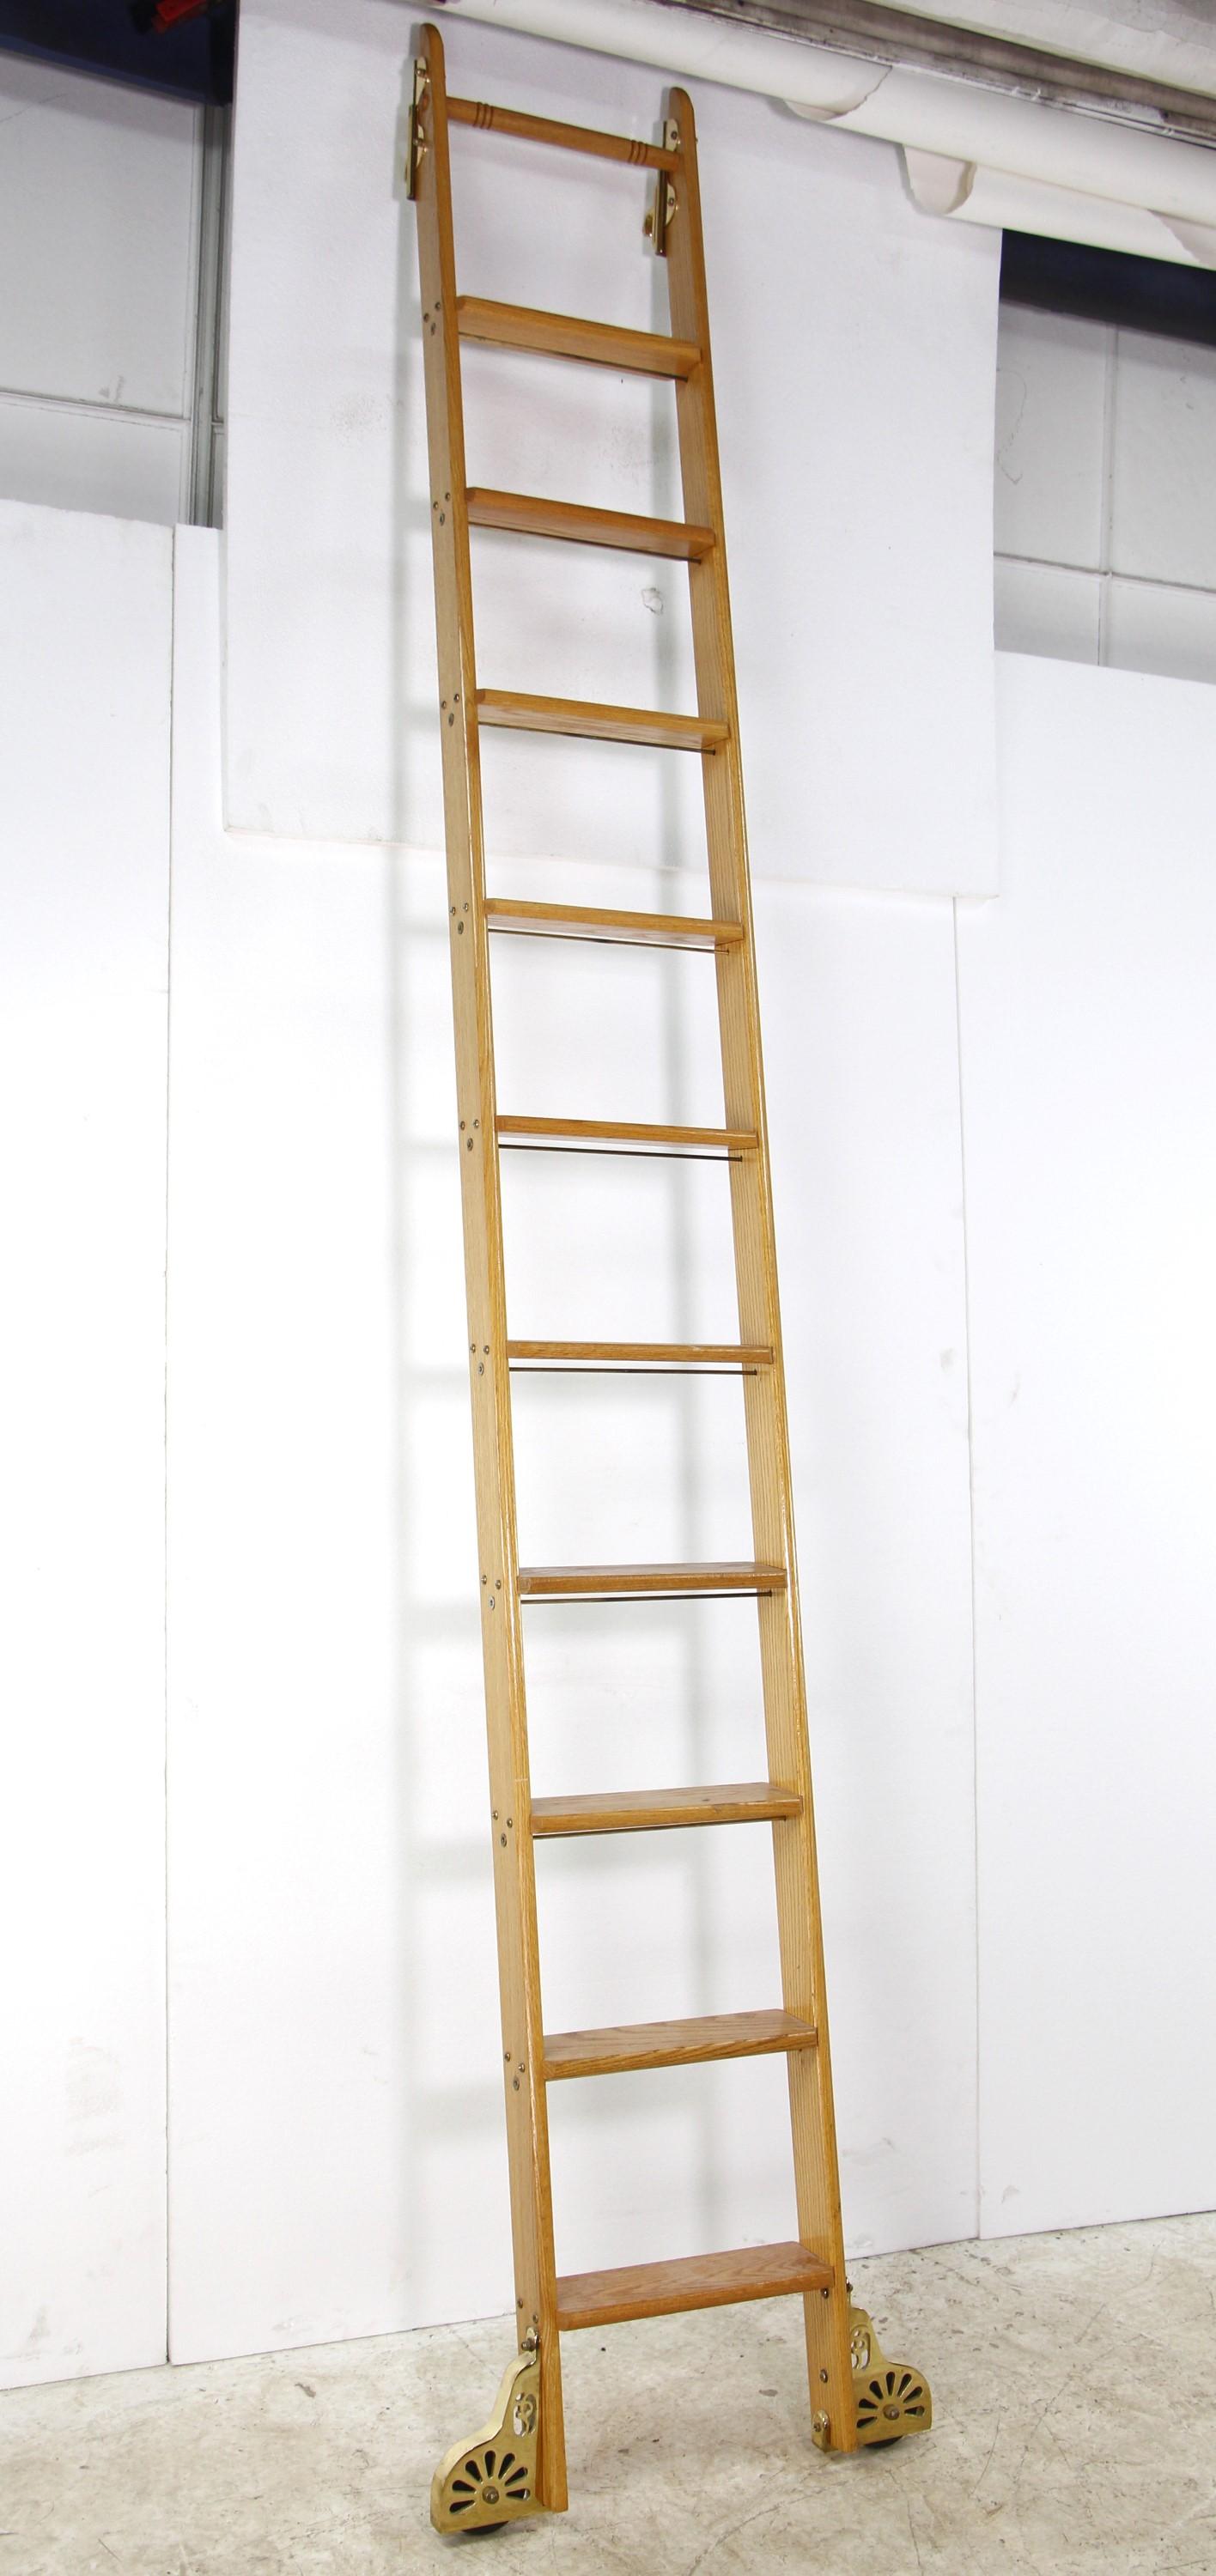 Mid-20th century oak library ladder in a light stain. Original Putnam Rolling Ladder Co, Inc. sticker, Features brass plated steel hardware and side rolling bottom wheels. No top wheels. Made by Putnam Rolling Ladder Co., Inc. Please note, this item